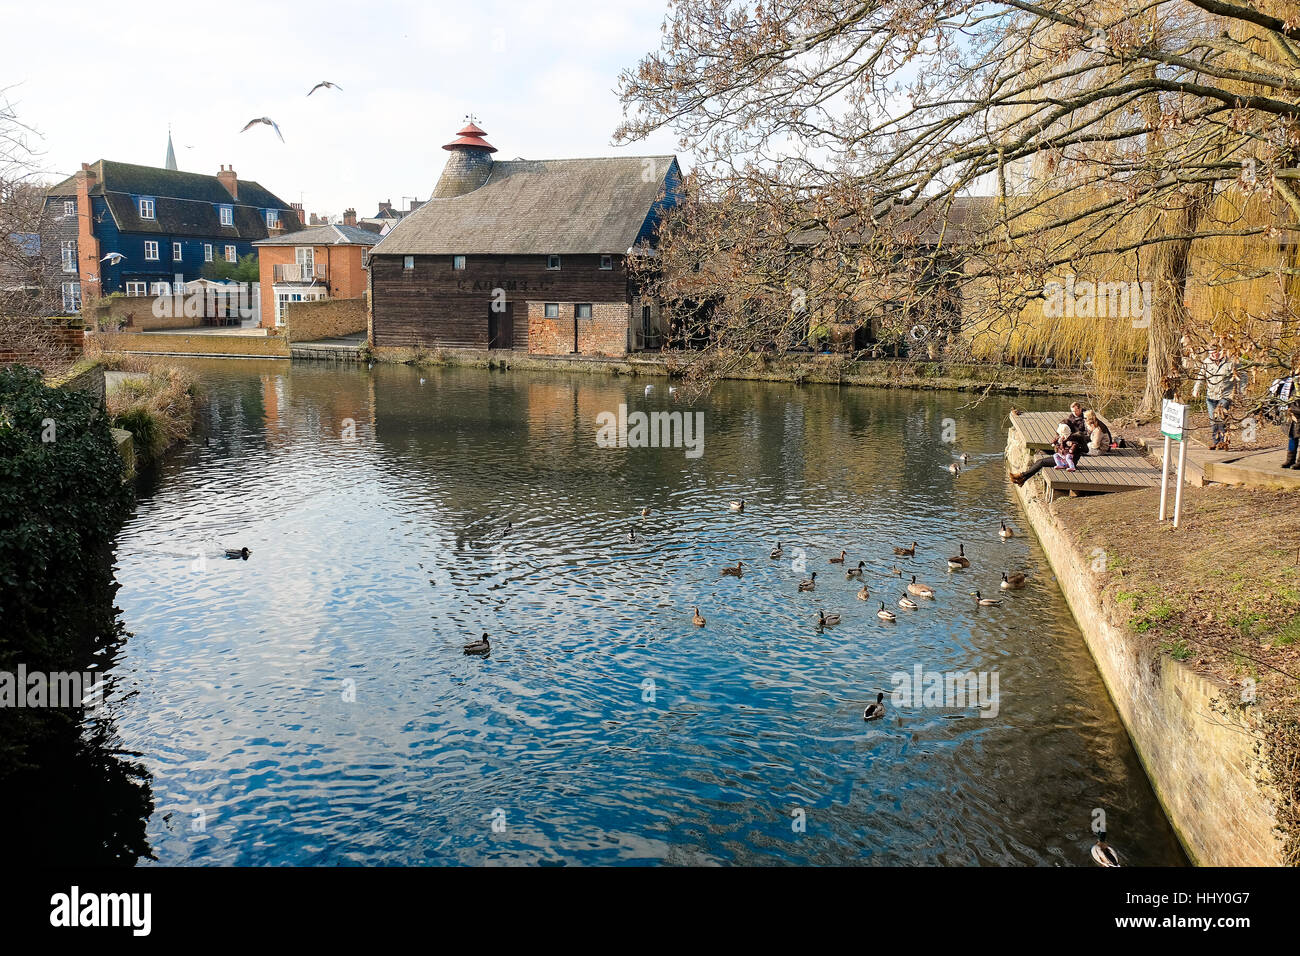 Parents let their children feed ducks by the side of a canal in Hertford, England as birds fly overhead Stock Photo